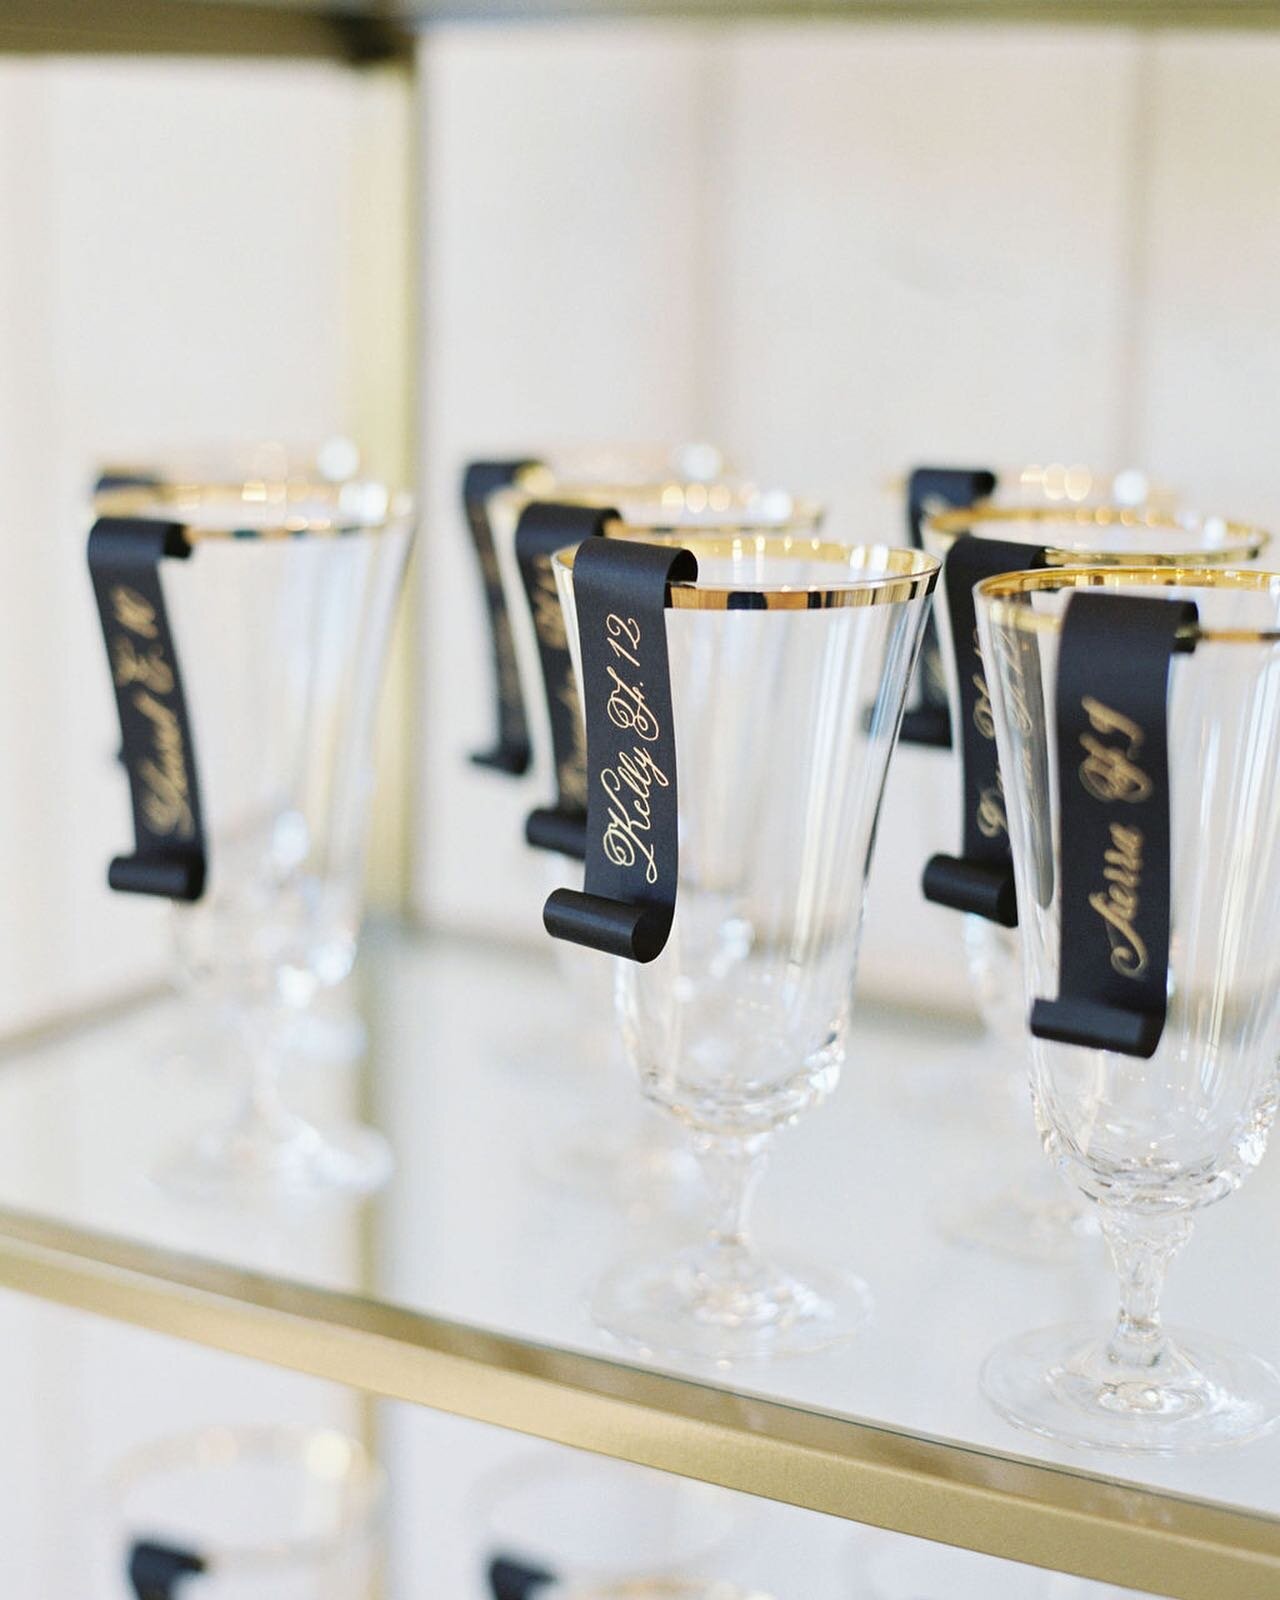 Check out these delightful scrolled name cards. Just perfect for your Luxury Wedding!⁣
⁣
Photographer: @sophiekayephotography⁣⁣
Planning, Design, Florals: @rachaelellenevents⁣⁣
Venue: @riverbottomsranch⁣⁣
Video: @russellalboroto⁣⁣
Papergoods: @letter